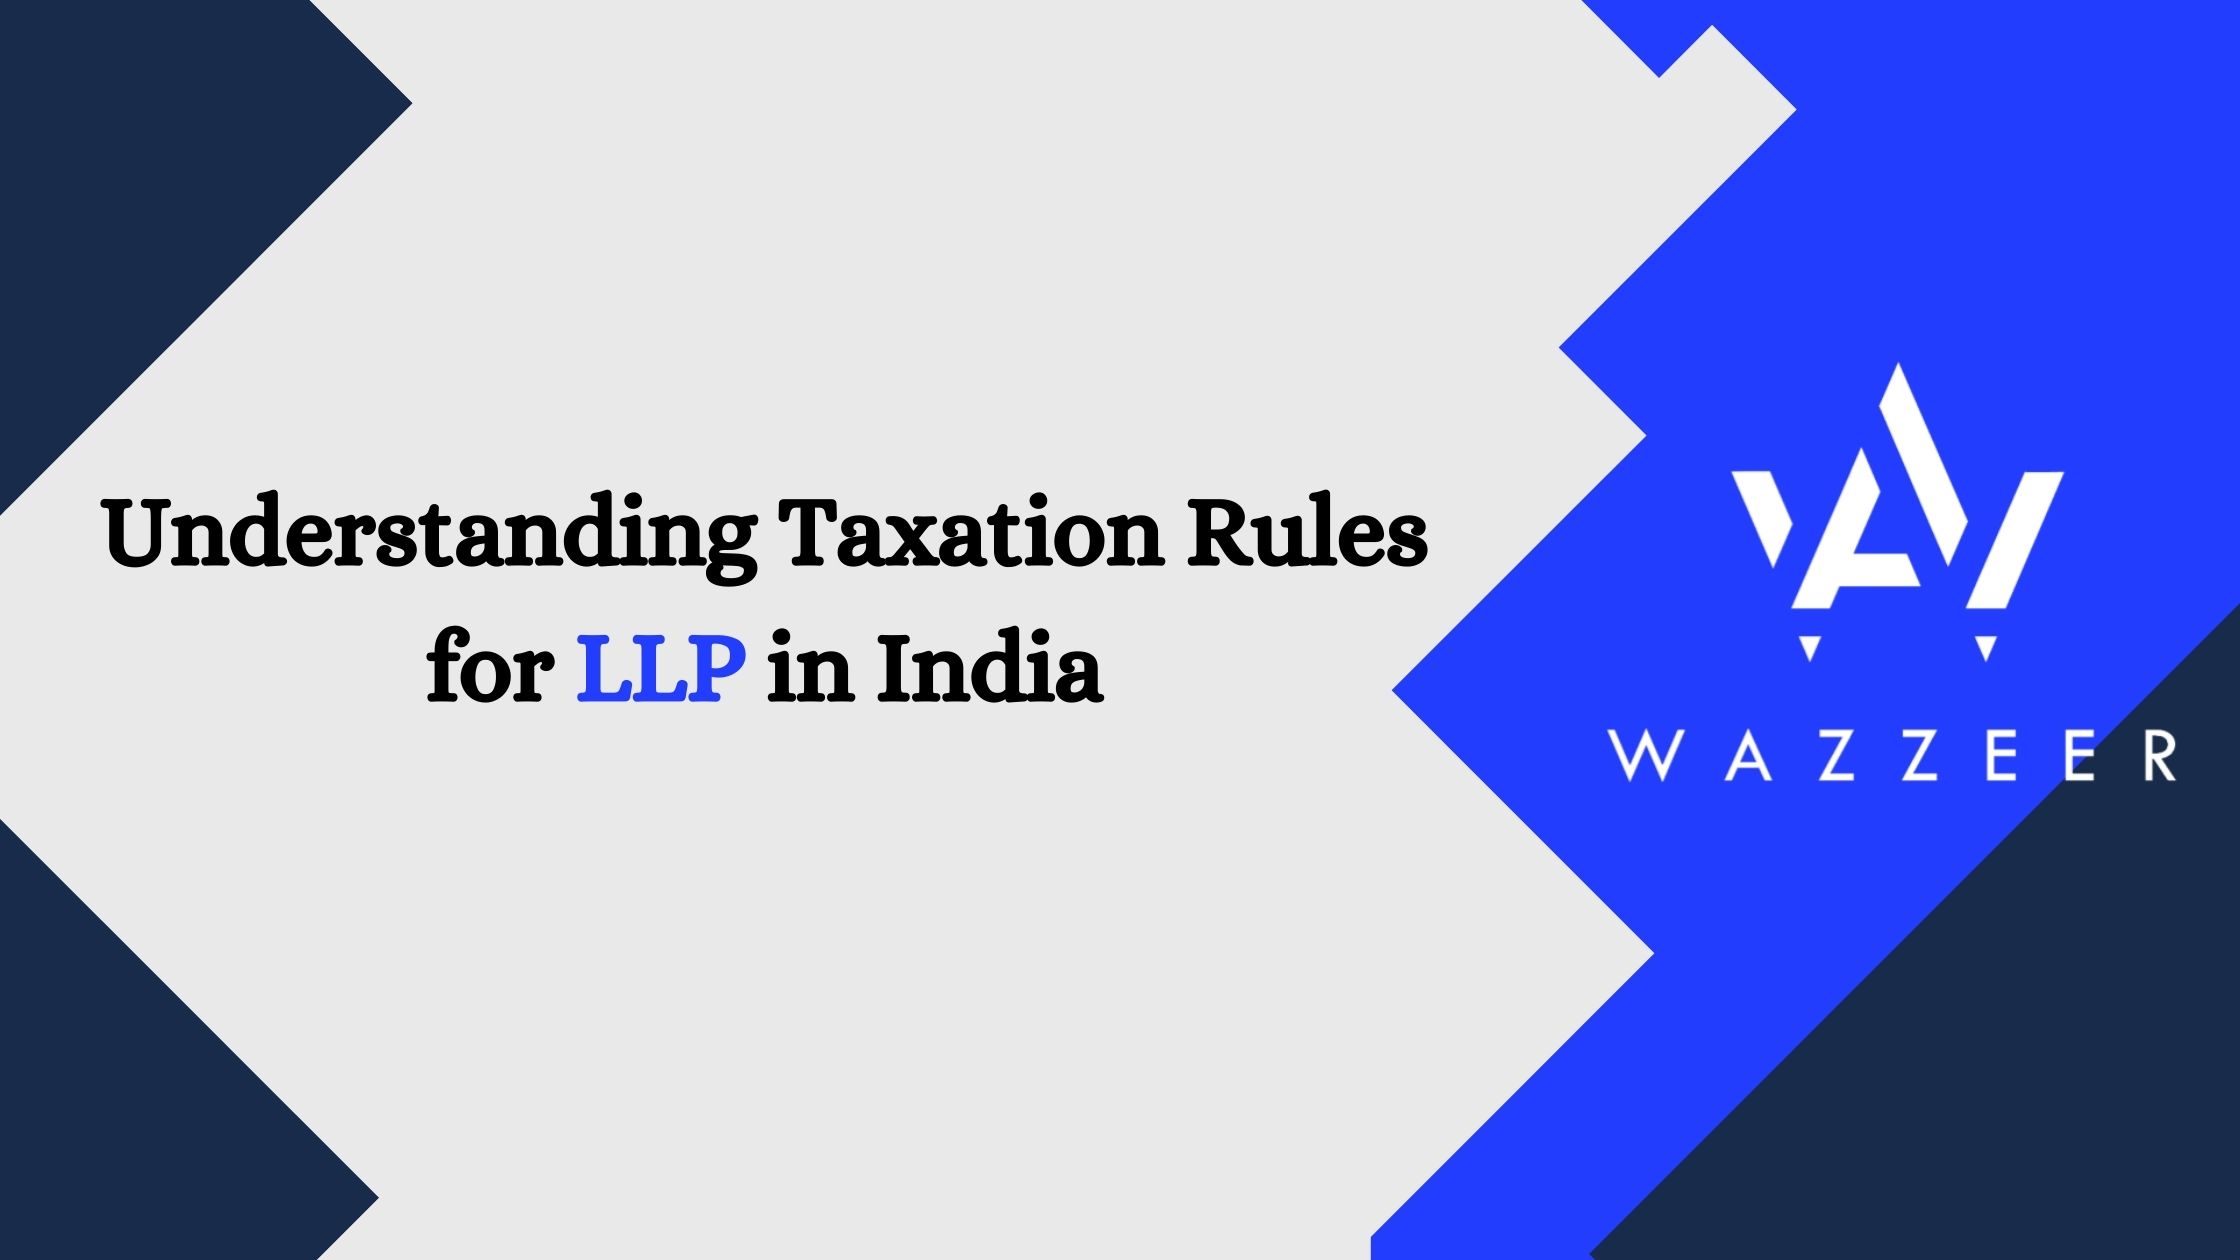 Understanding Taxation Rules for LLP in India